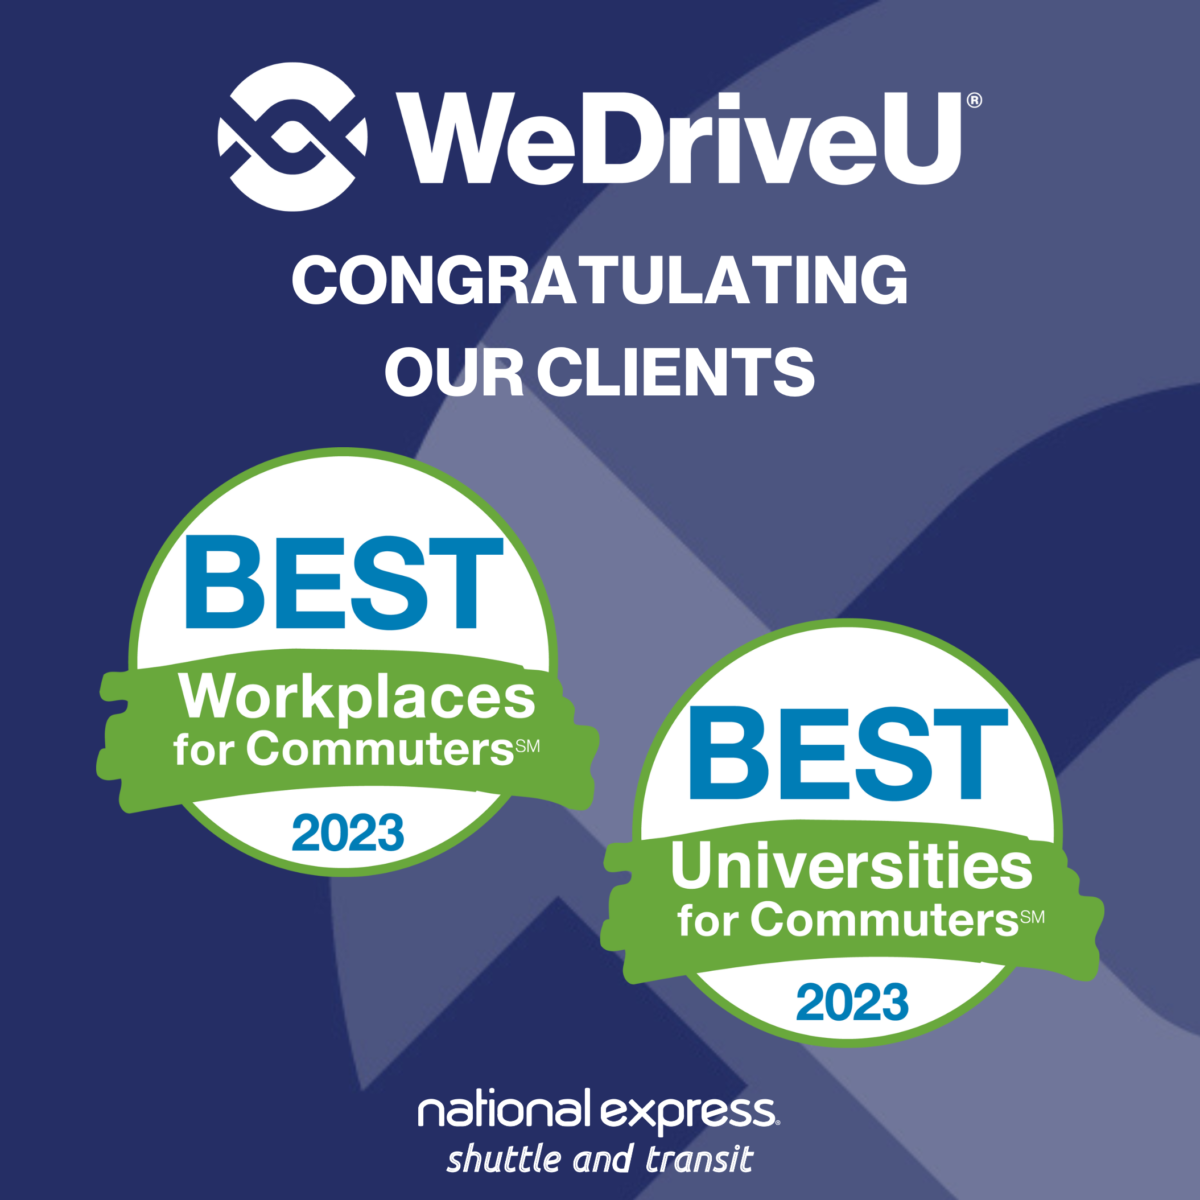 WeDriveU Customers Named 2023 Best Workplaces for Commuters and  Best Universities for Commuters